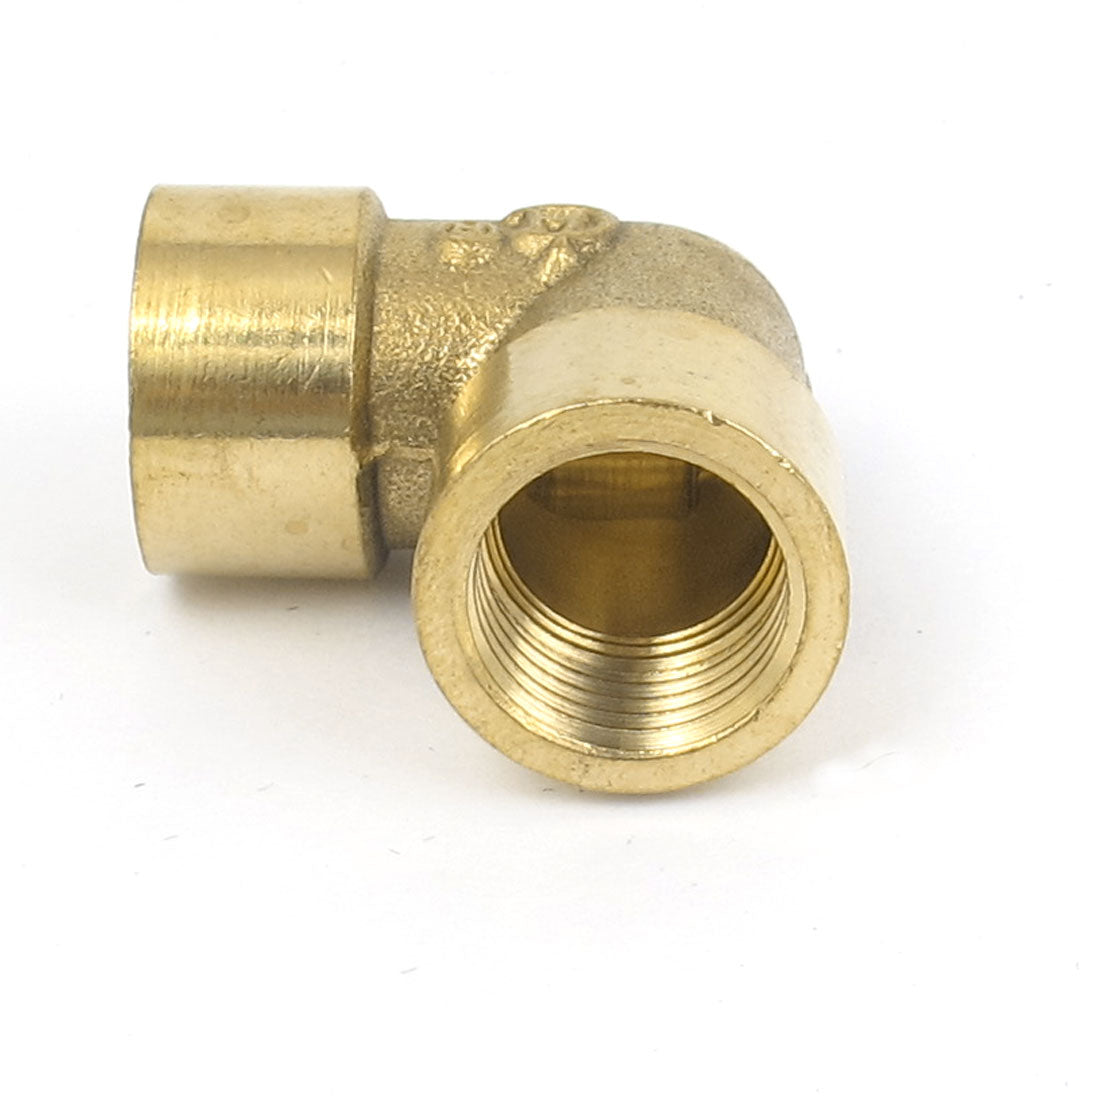 uxcell Uxcell 1/4BSP Female to Female Metal L Shape Elbow Hose Pipe Tube Fitting Connector 2pcs